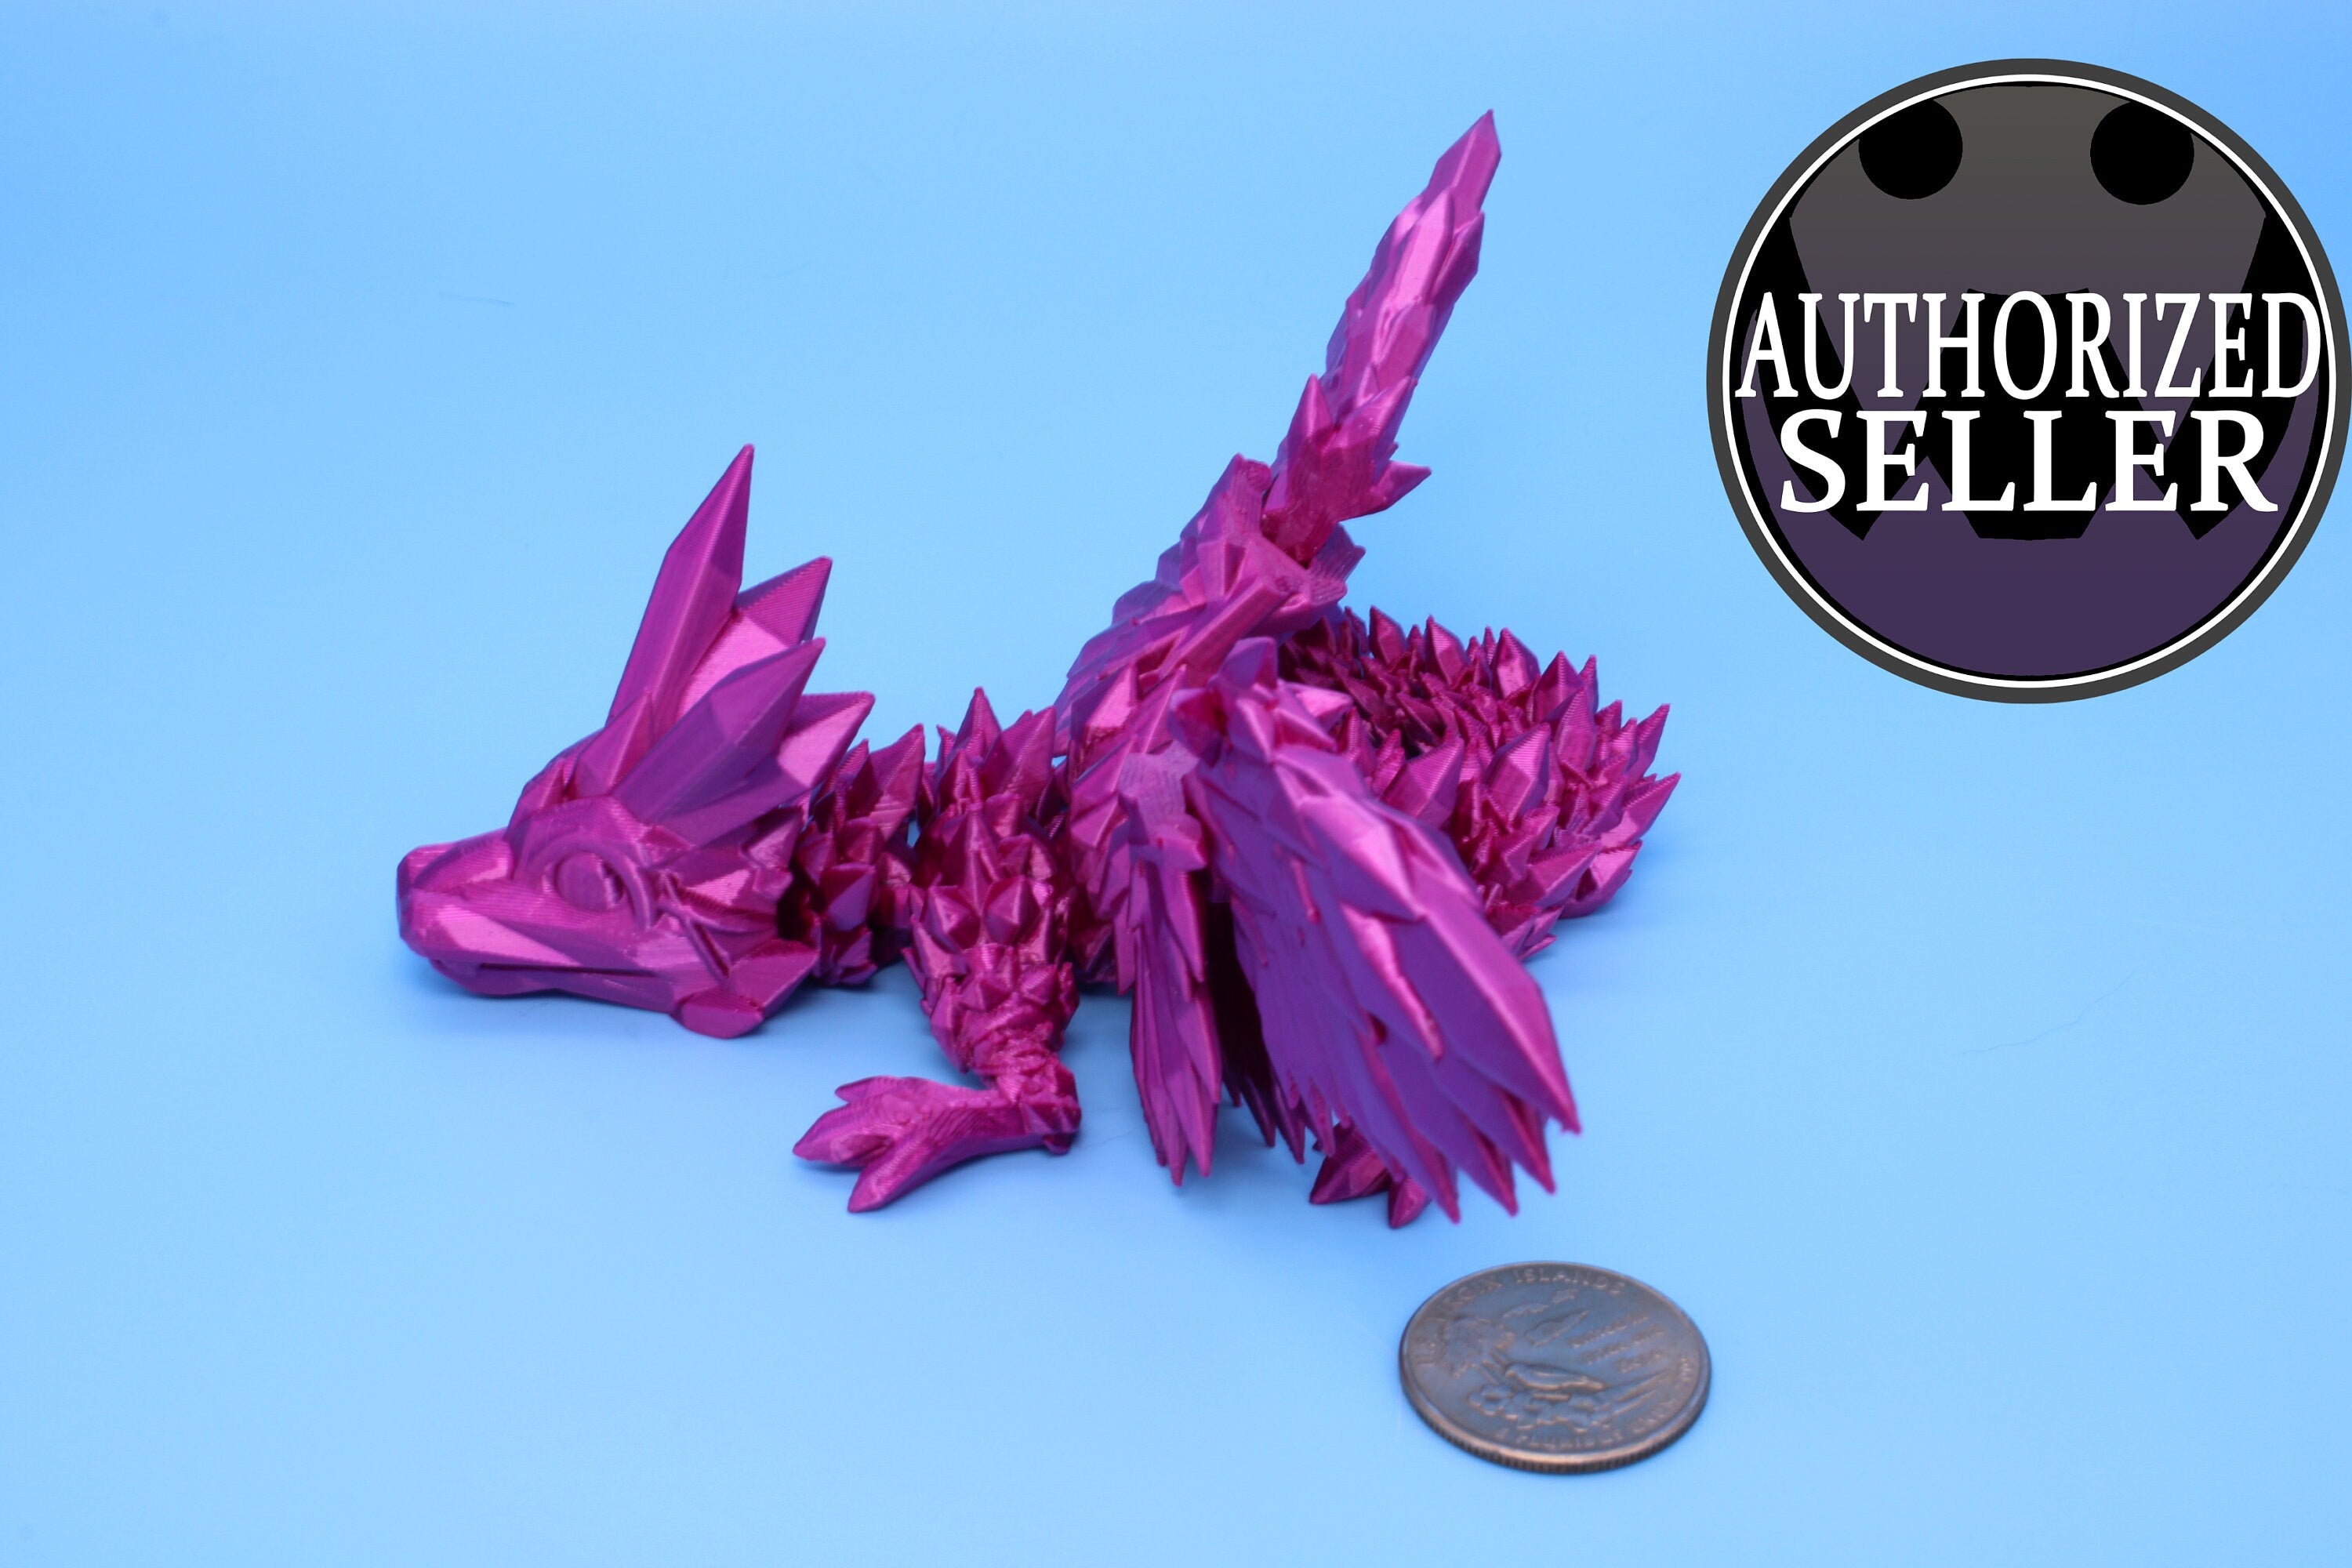 Baby Crystal Wing Dragon- Pink| Miniature | 3D printed | Dragon Fidget | Flexi Toy | 7 in. | Pet Dragon.